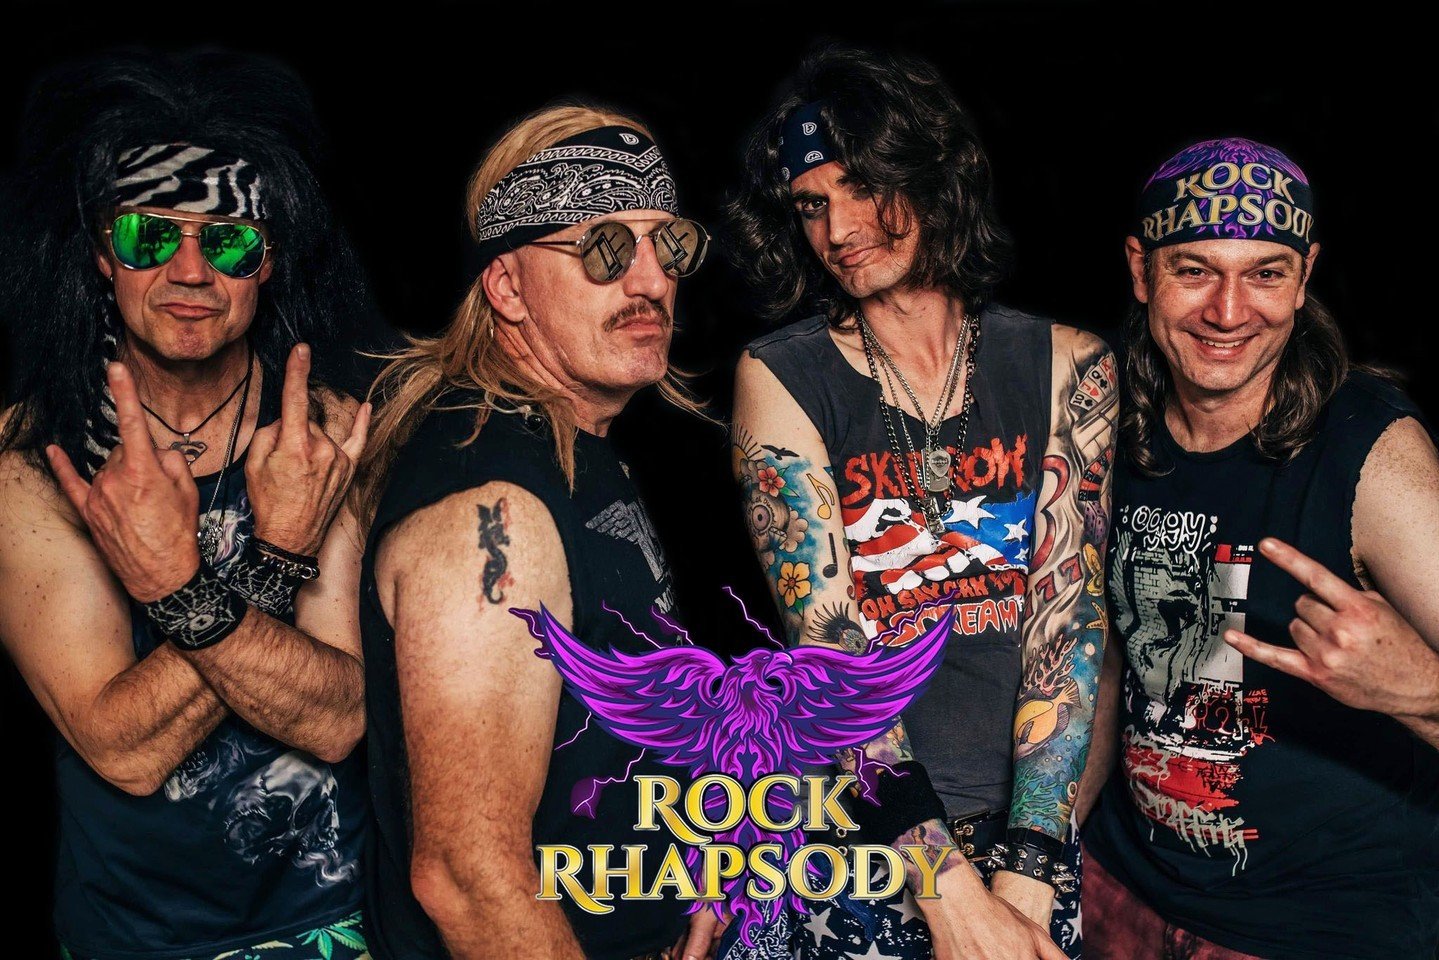 🎸 Get ready to rock the Hunter Valley with Rock Rhapsody at Huntlee Tavern on Saturday, May 18th! Enjoy 80s classics by DEF LEPPARD, BON JOVI, KISS, MOTLEY CRUE, QUEEN, and more! Dress to impress for a chance to win prizes. Admission is FREE! Book y